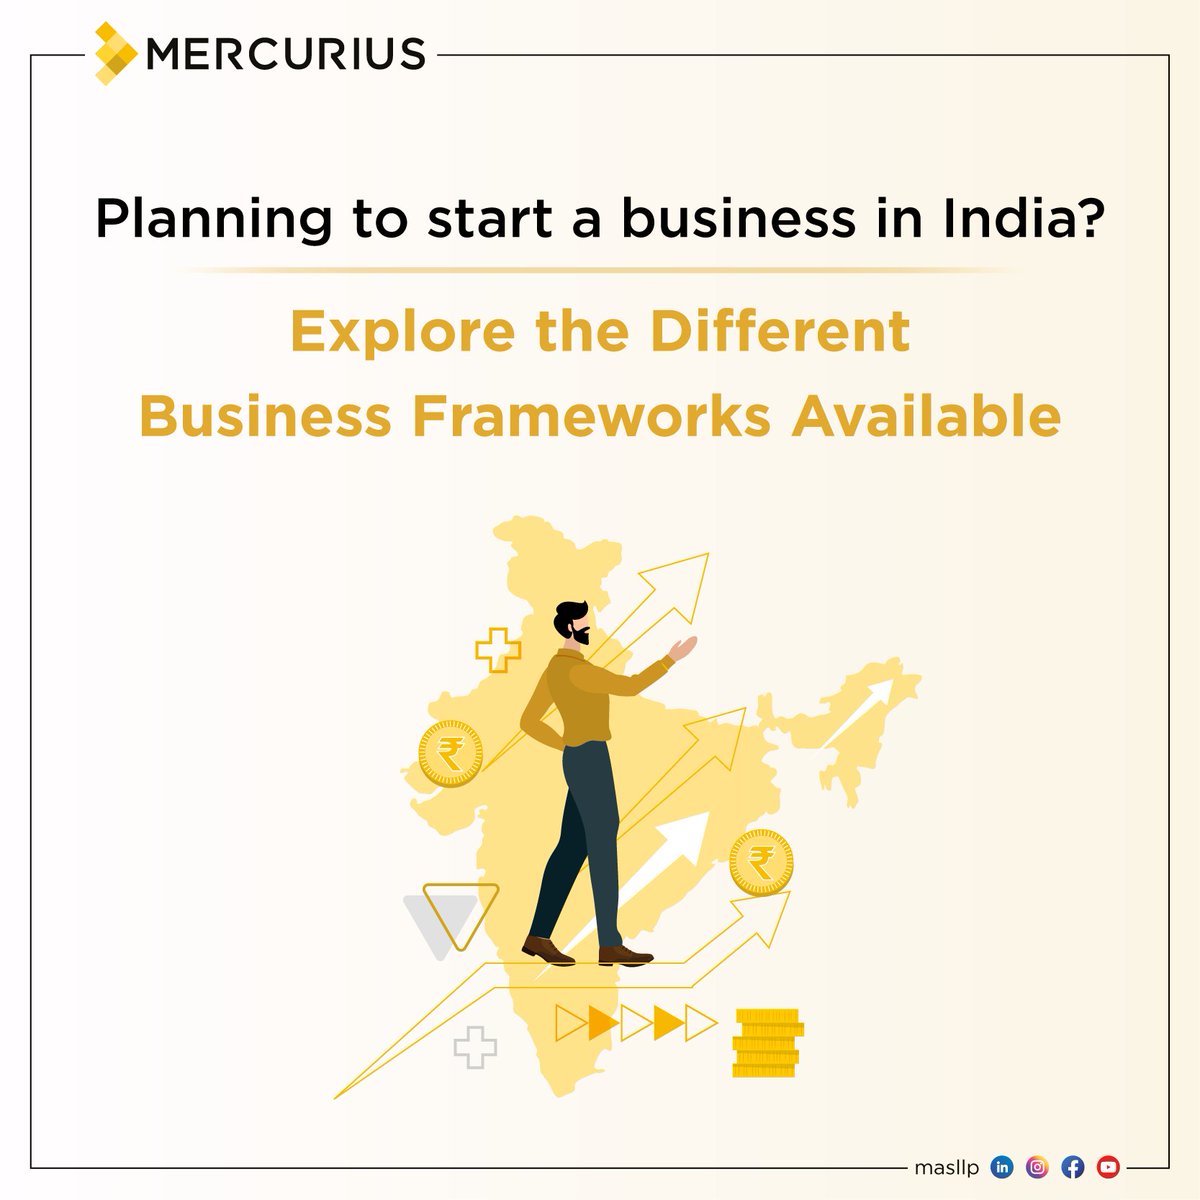 Planning to start a business in India? 

Explore with us the diverse business frameworks available for operating in India.
Click here: masllp.com/setting-up-bus…

#businessstartup #companysecretary #ngoregistration #certification #limitedliabilitypartnership #auditor  #incorporation